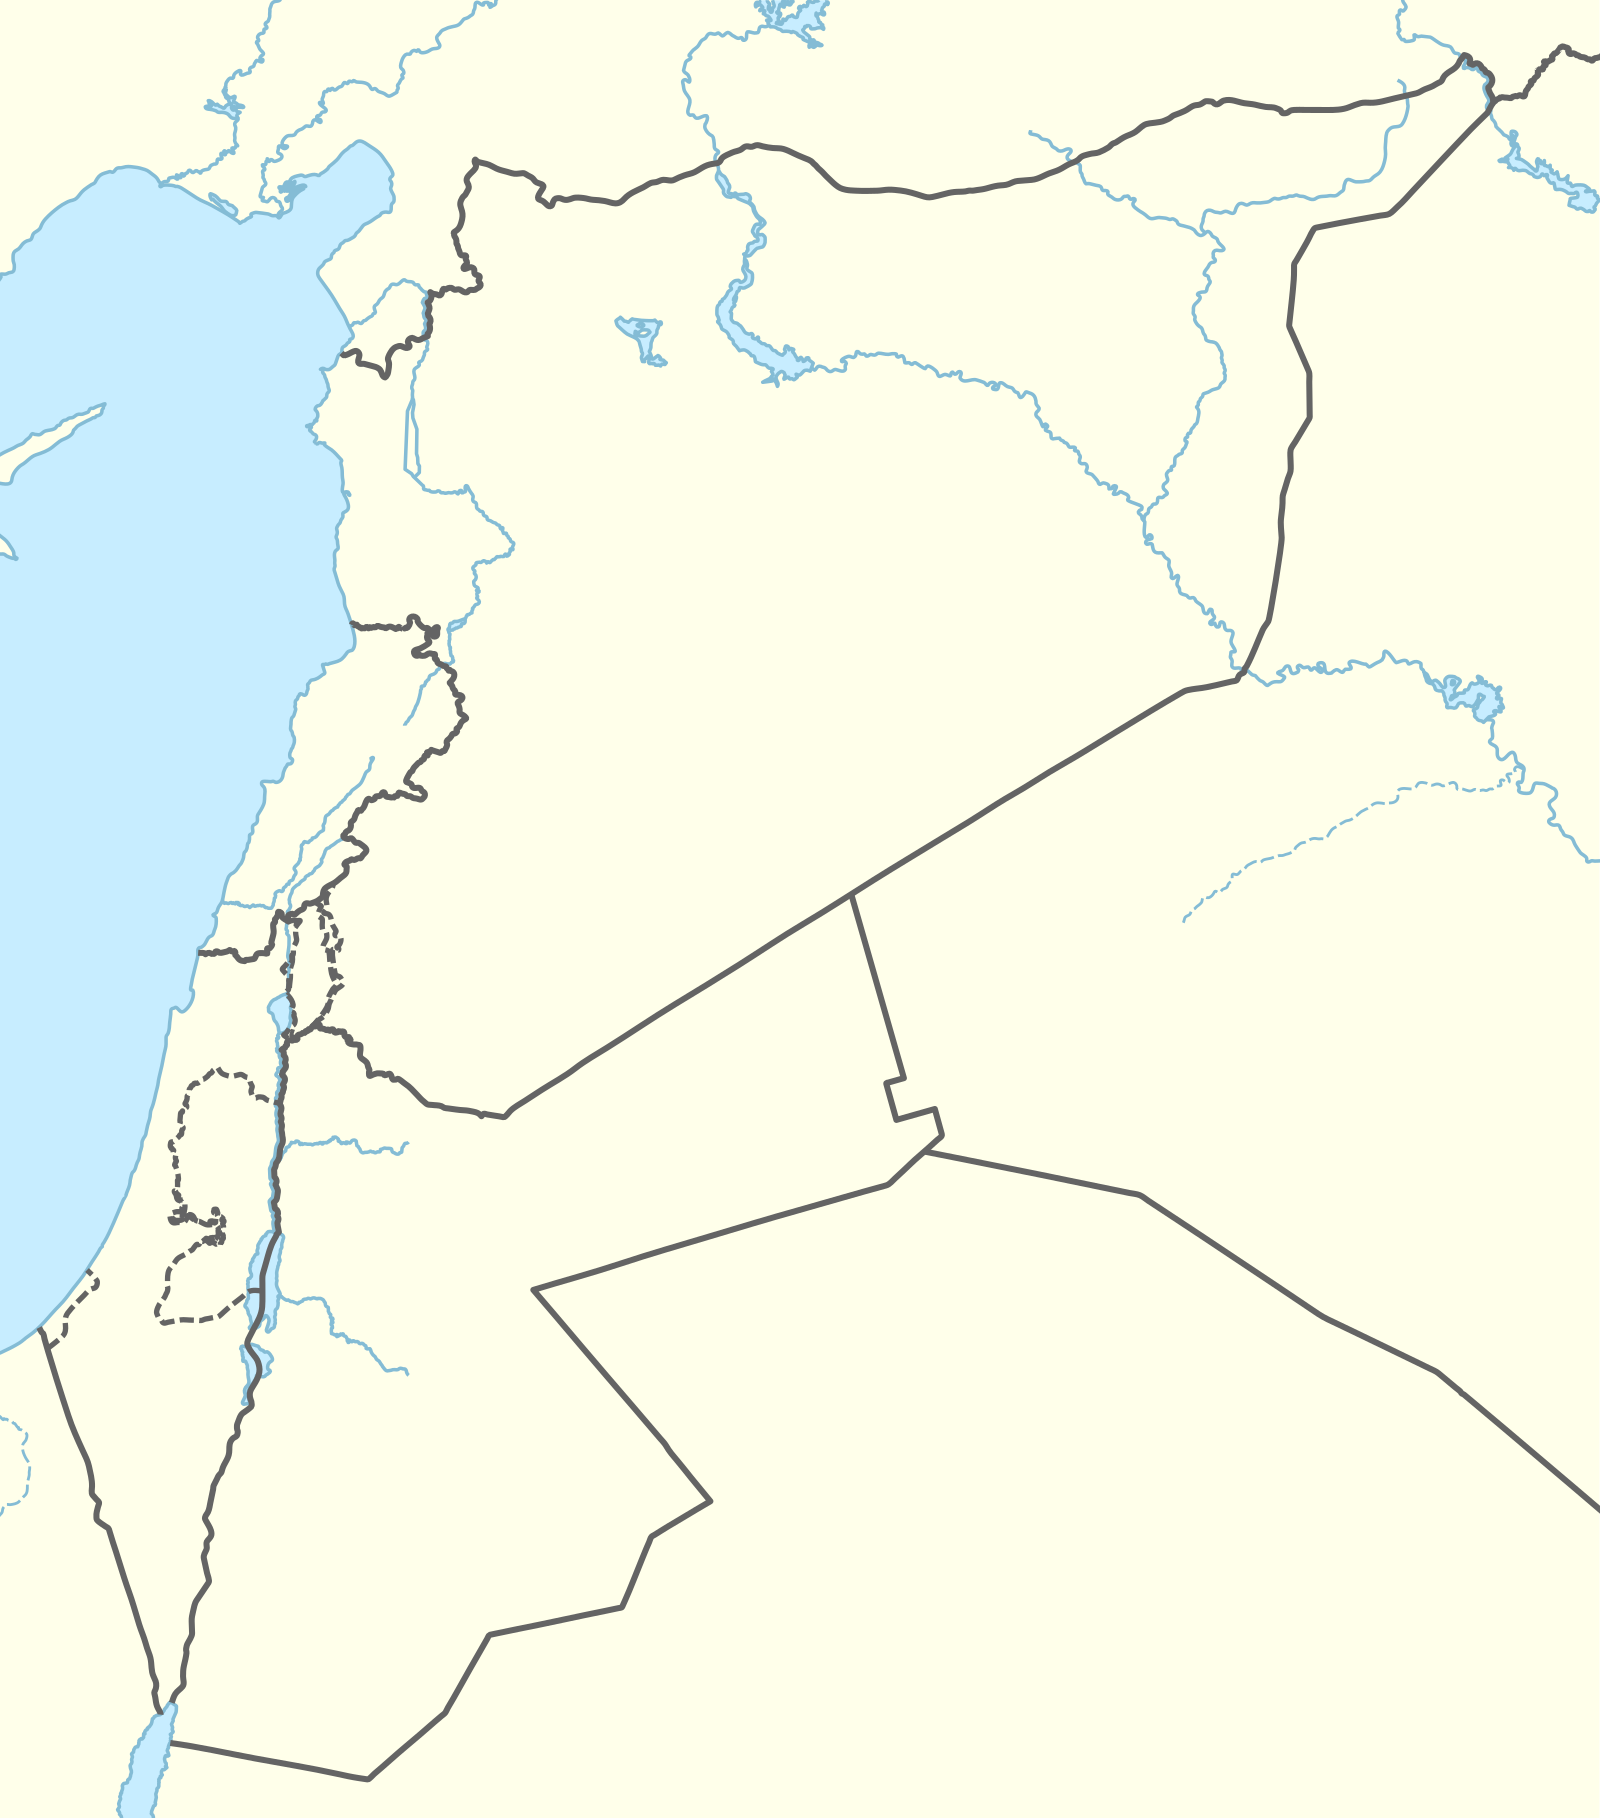 Cana is located in Levant